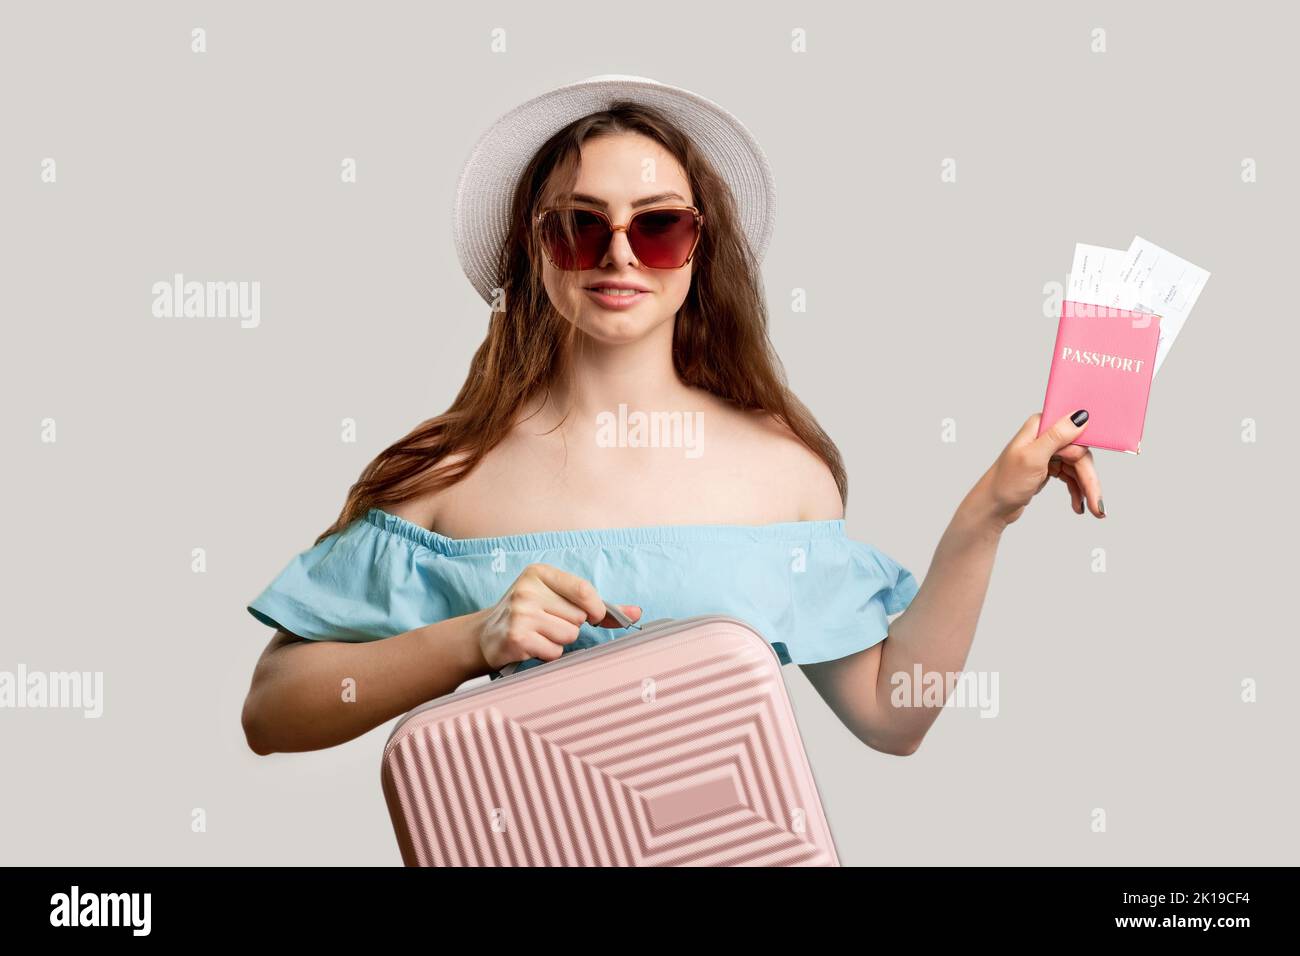 Summer holiday. Flight check-in. Happy woman in vacation outfit holding pink suitcase and foreign id boarding pass. Looking at camera isolated on neut Stock Photo